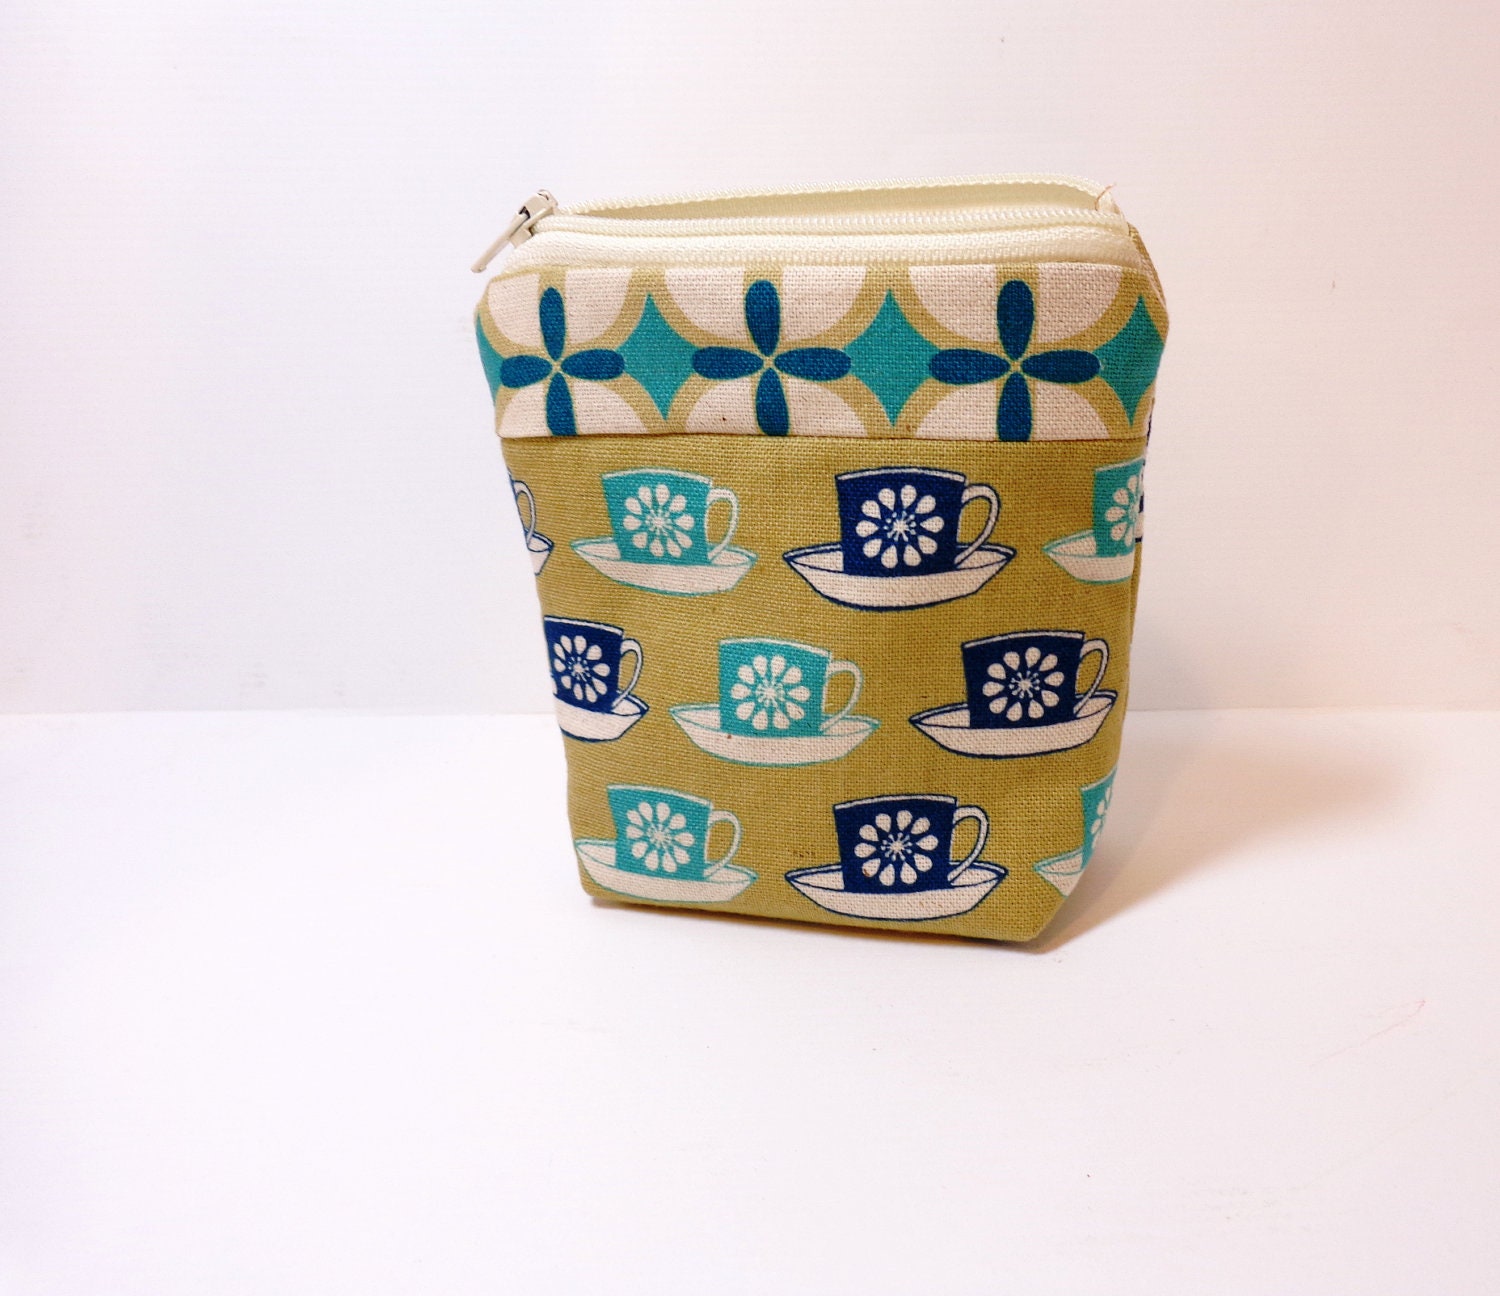 Small  Zipper Pouch Small Change Purse Small Wallet  Teacups in Teal and Blue